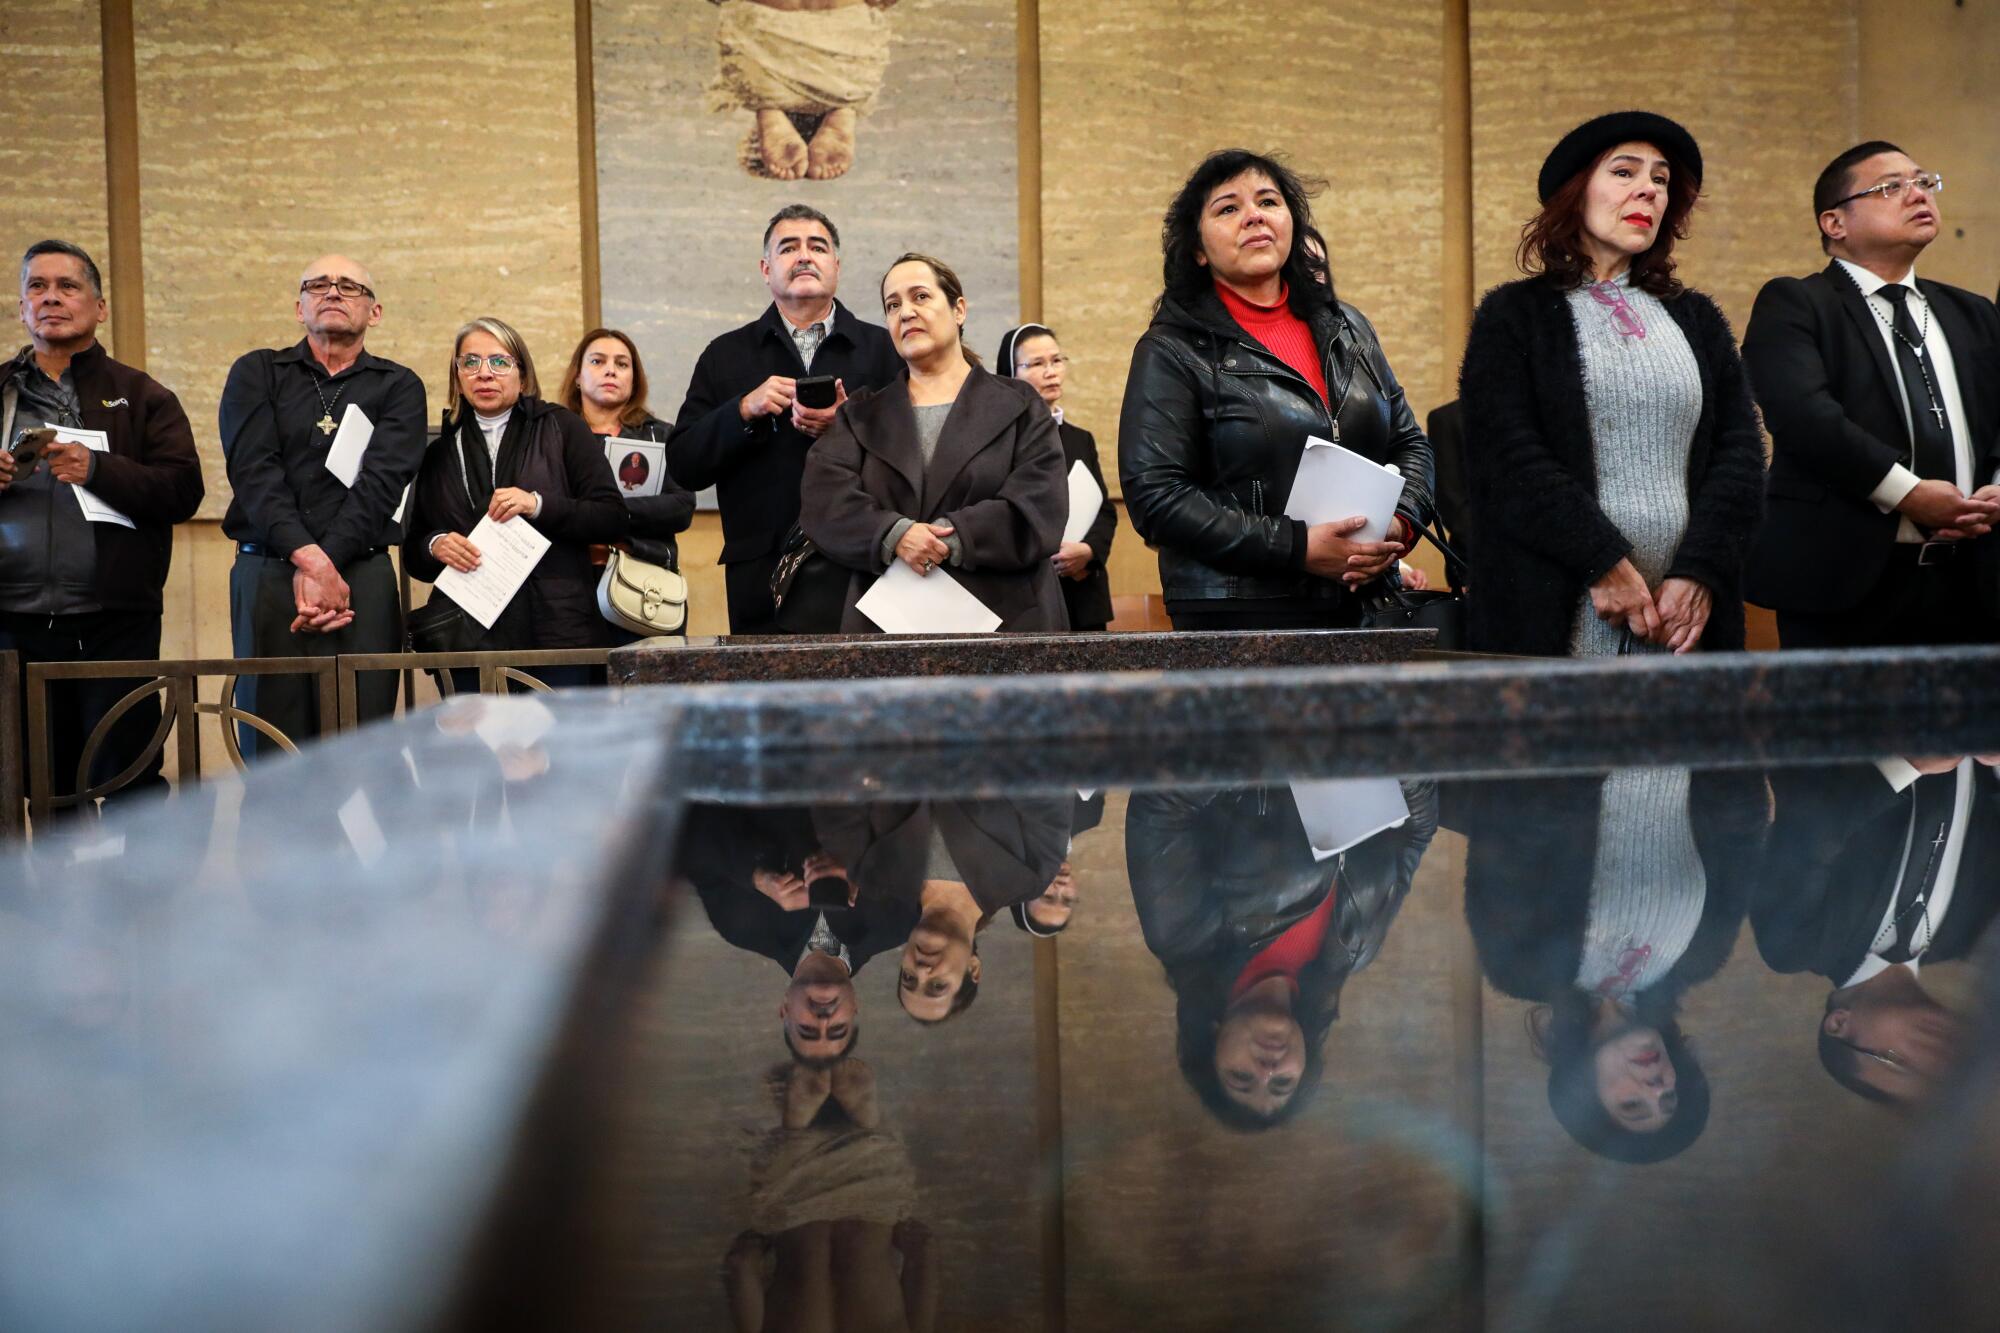 Visitors are reflected in the baptismal font as they wait 